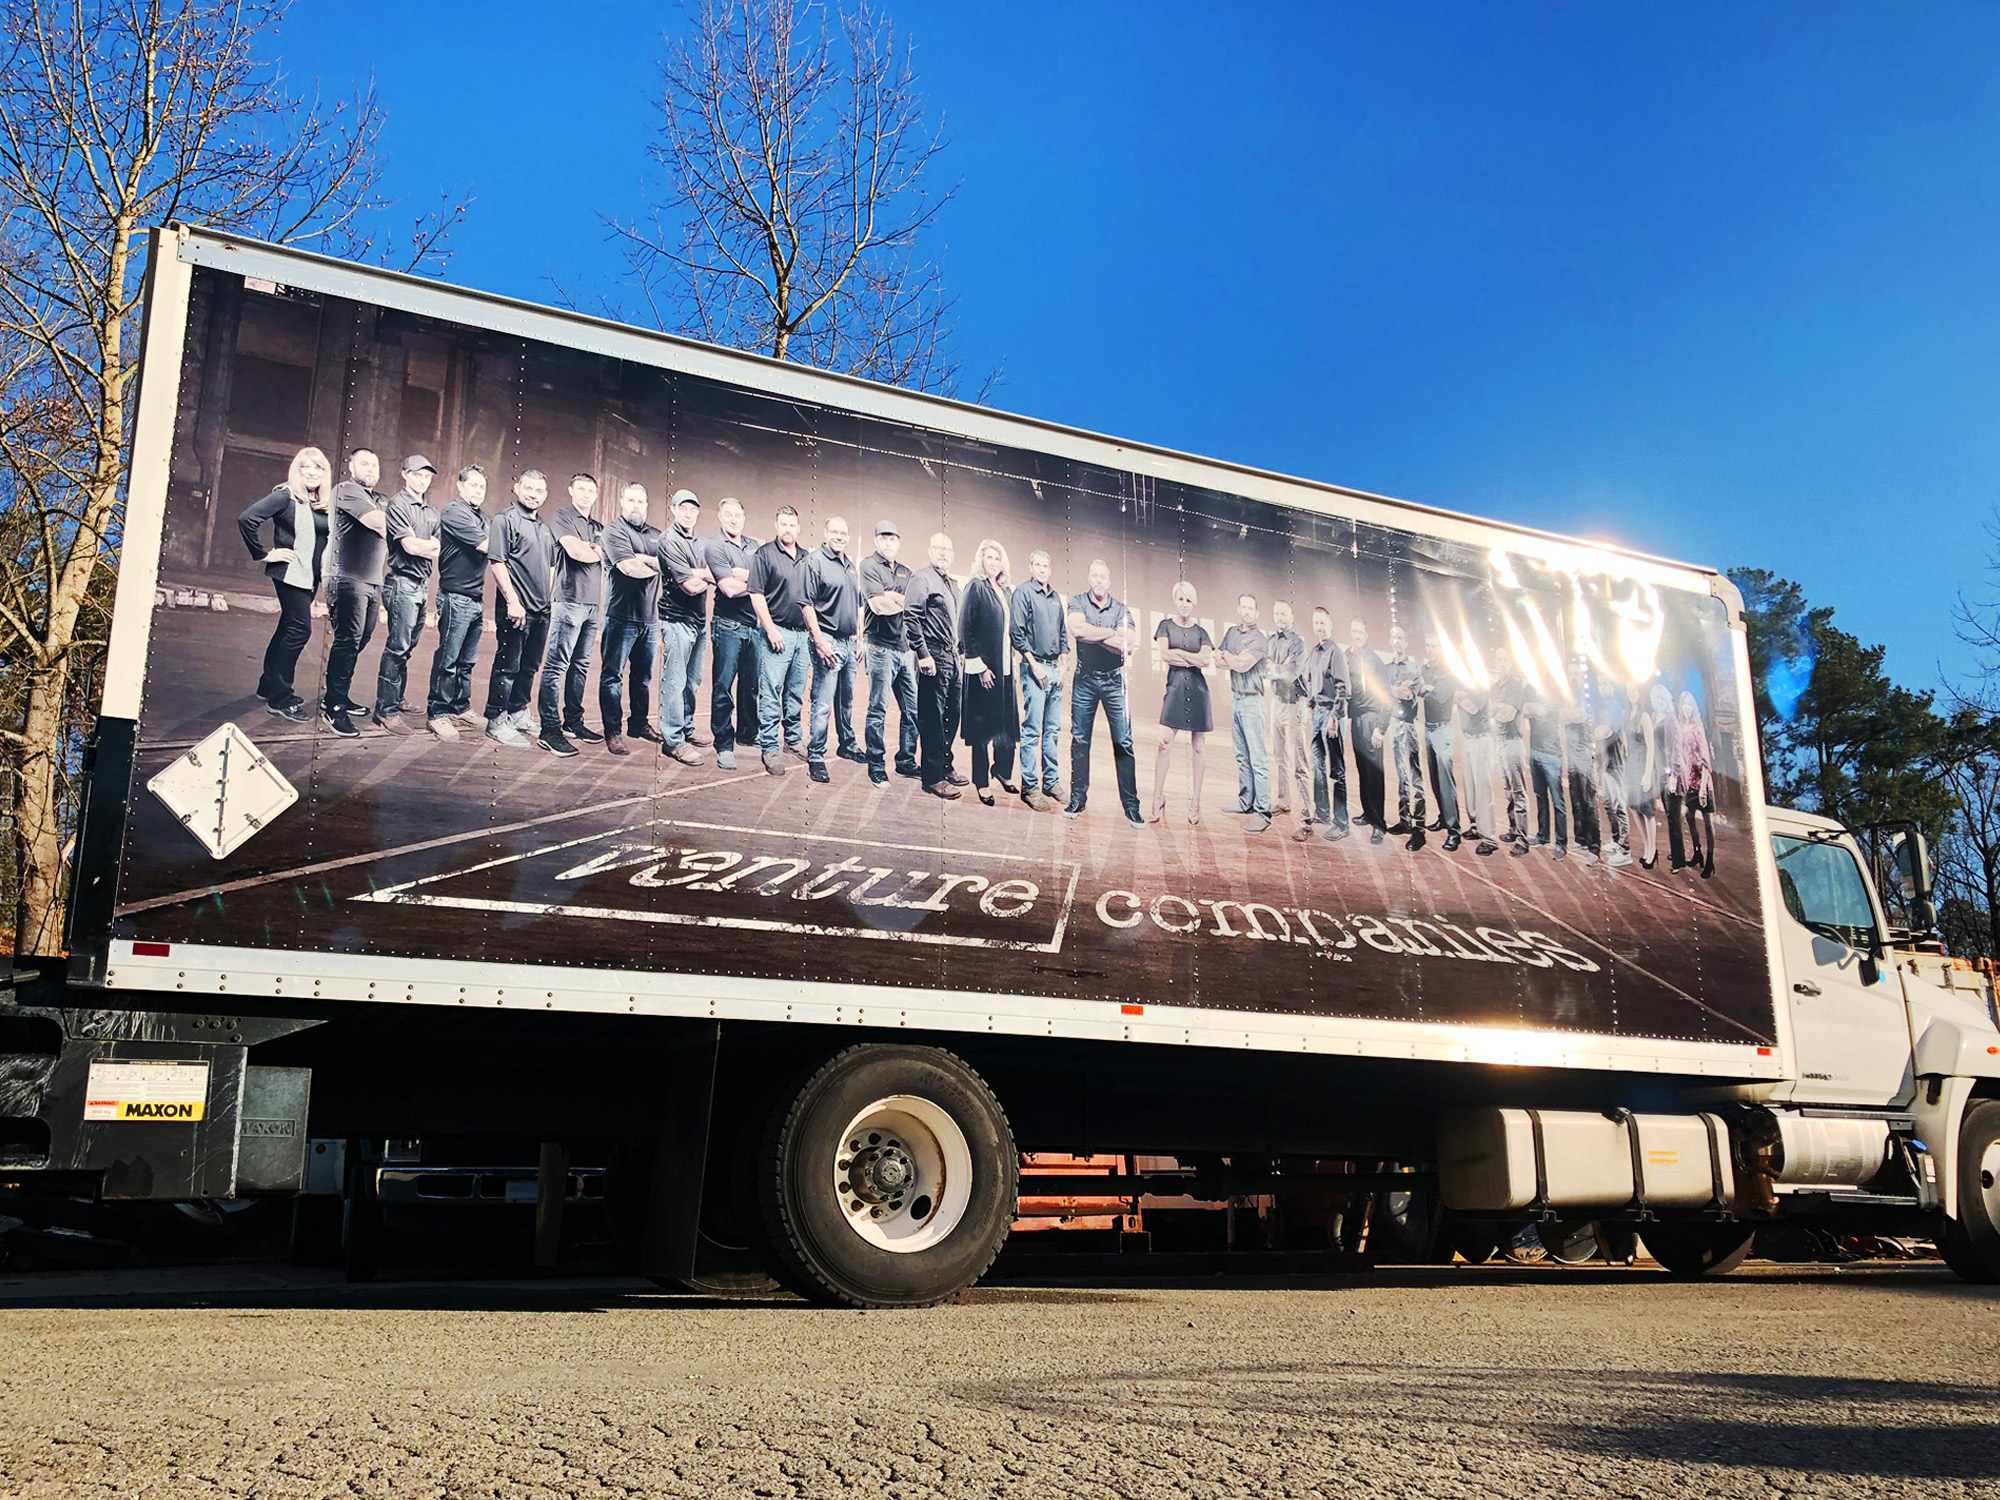 Large format photos on a trailer.